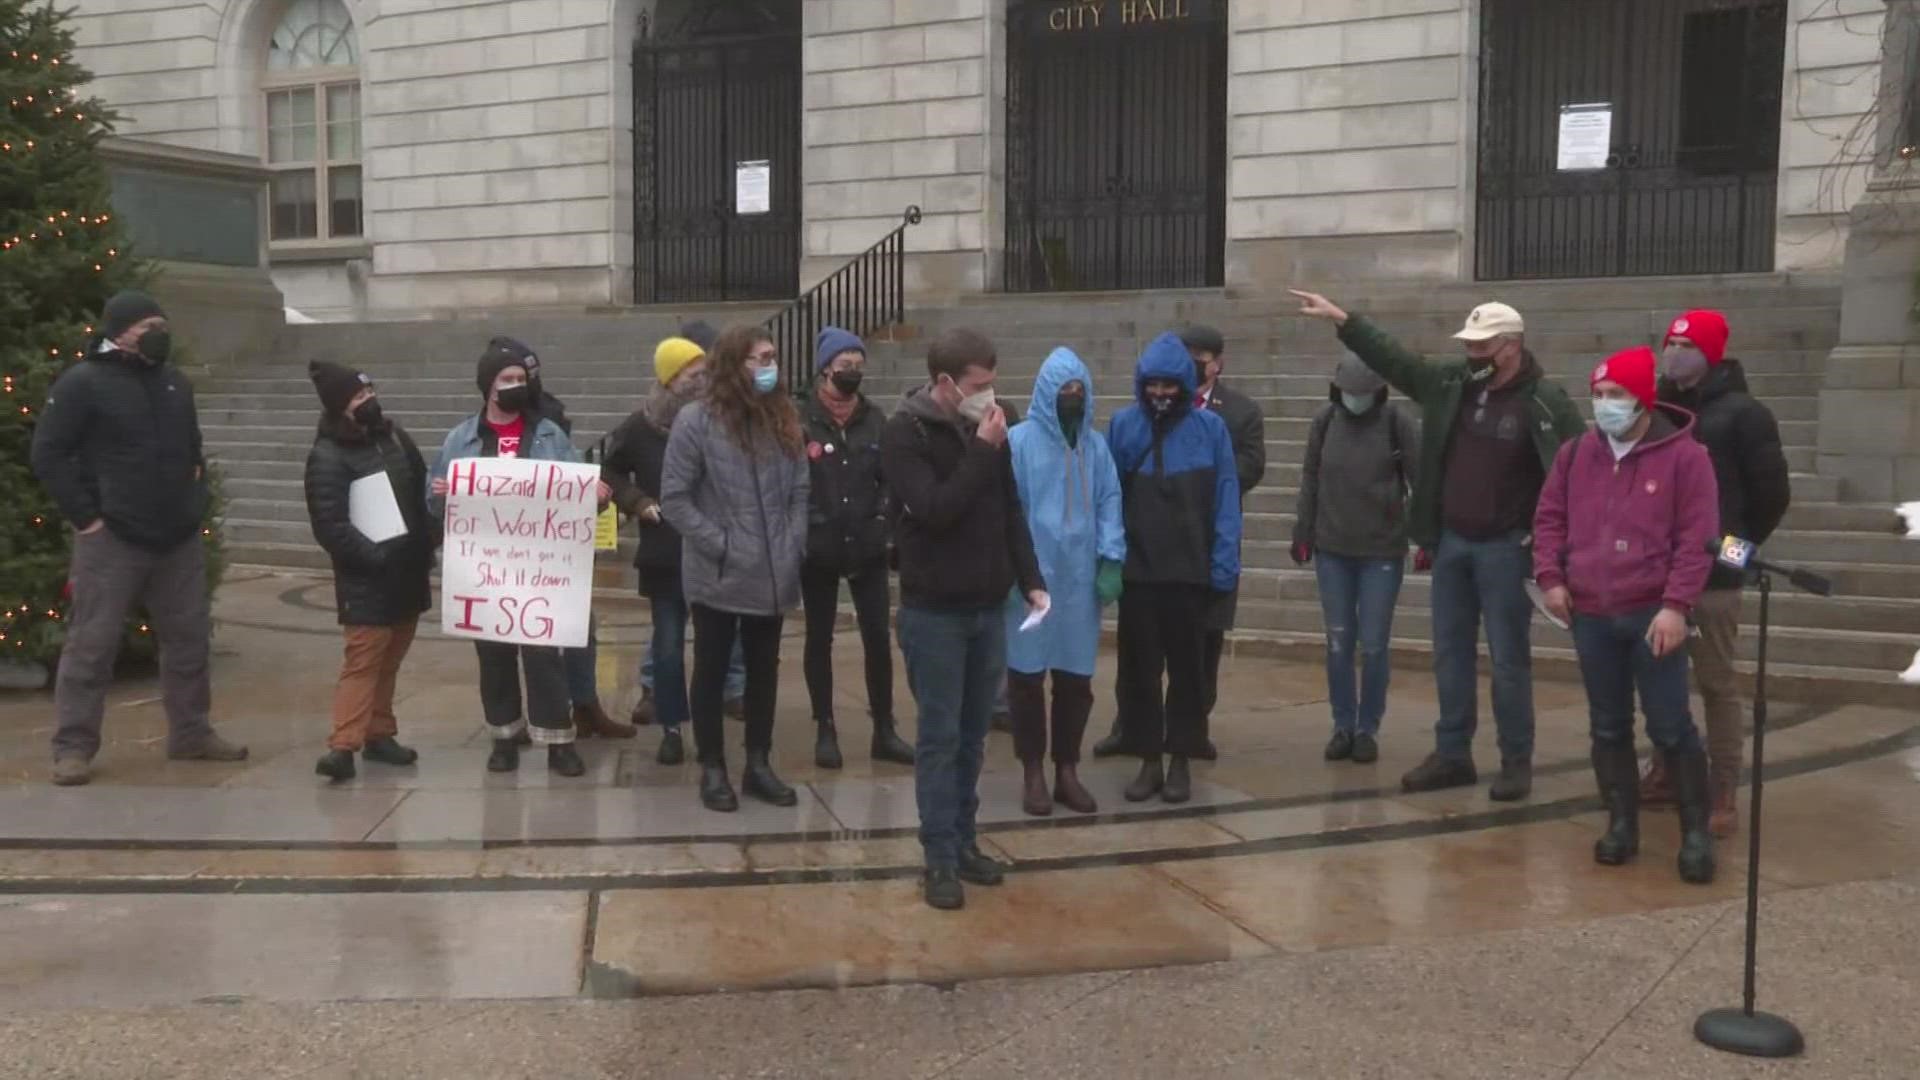 Roughly two dozen rallied at Portland City Hall, urging the City Council to keep the City's State of Emergency, which triggered hazard pay of $19.50 minimum wage